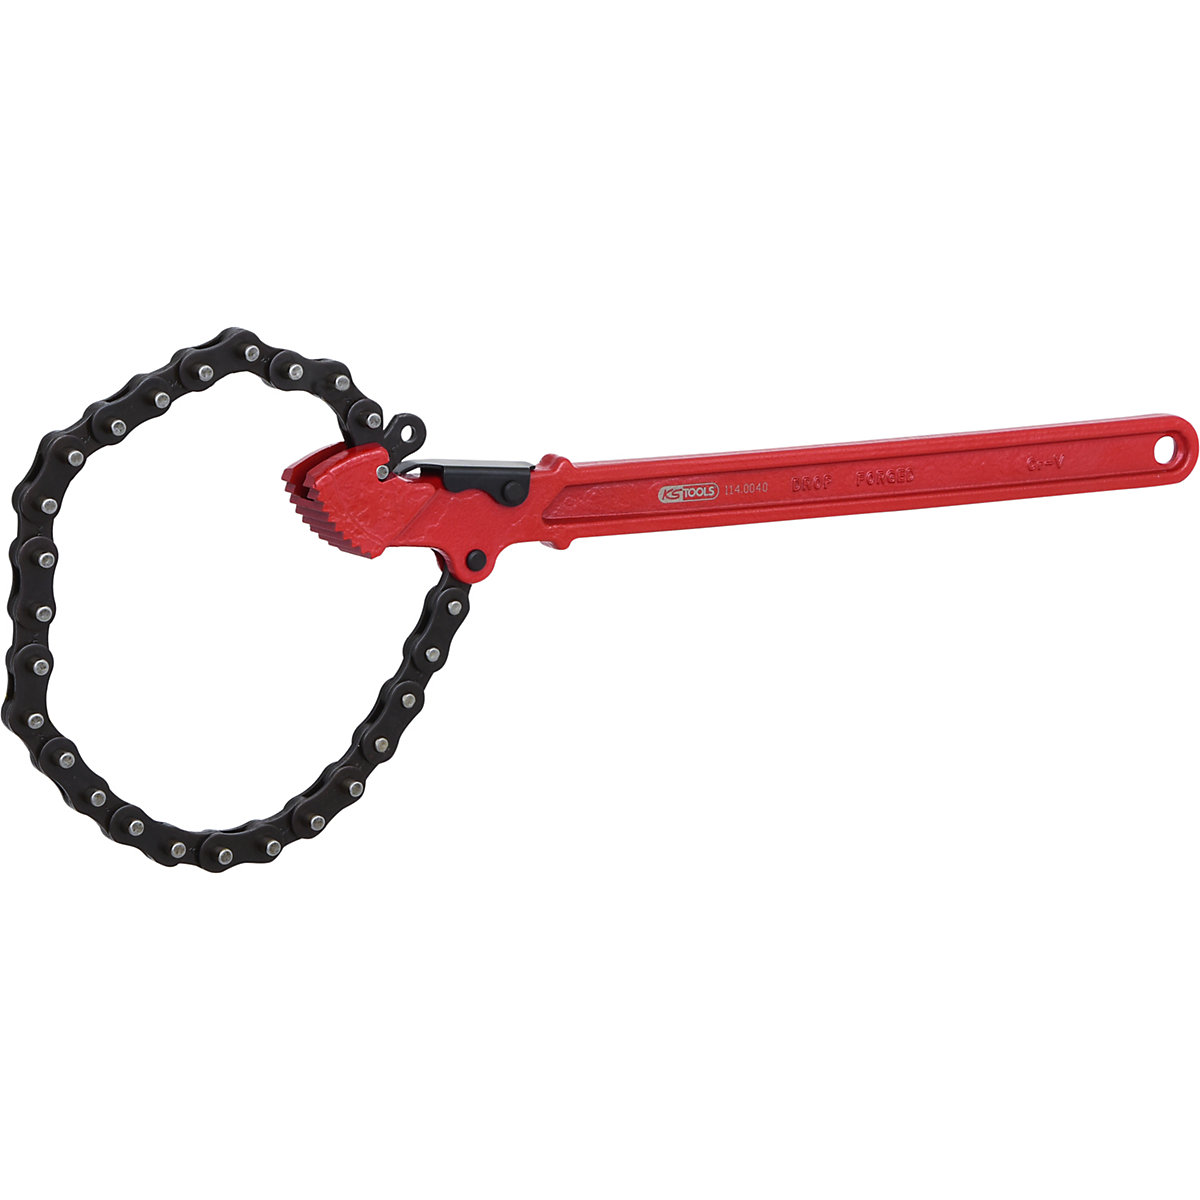 Chain pipe wrench - KS Tools